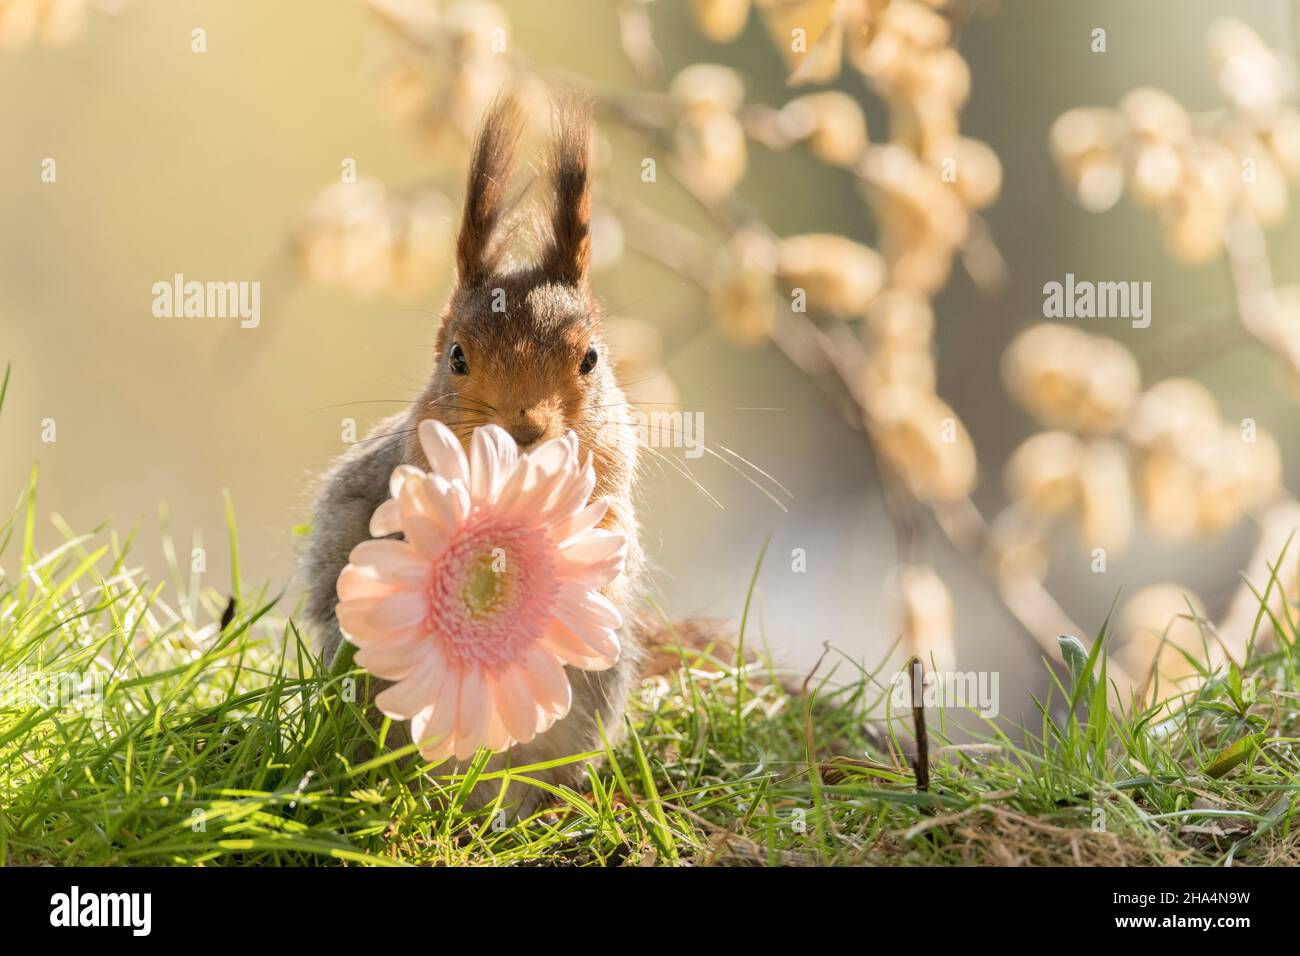 red squirrel looks behind a pink daisy Stock Photo